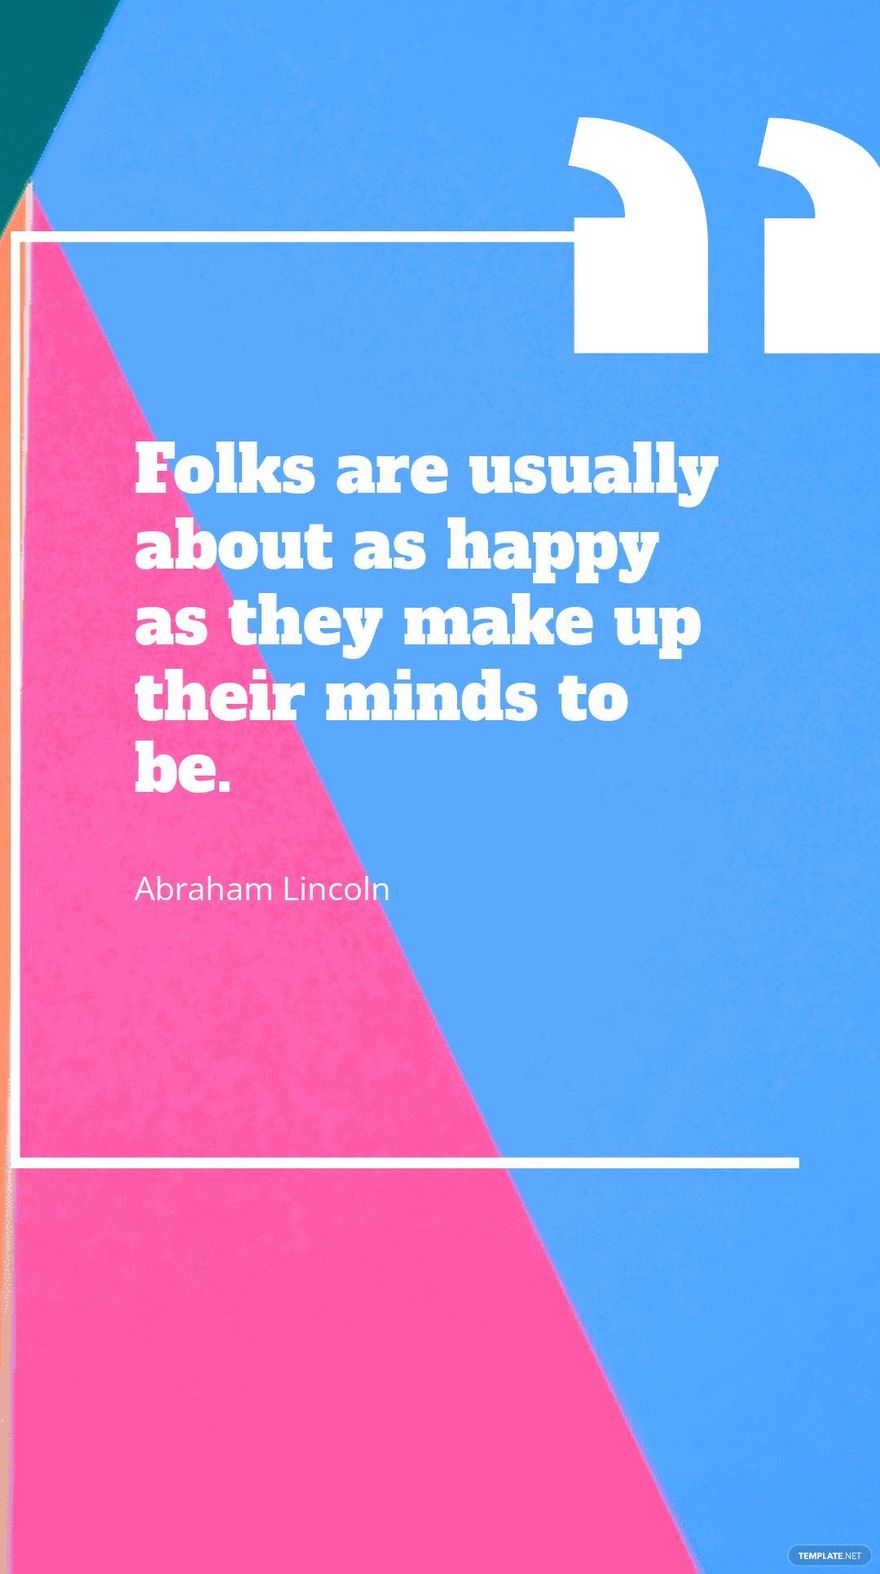 Abraham Lincoln - Folks are usually about as happy as they make up their minds to be.